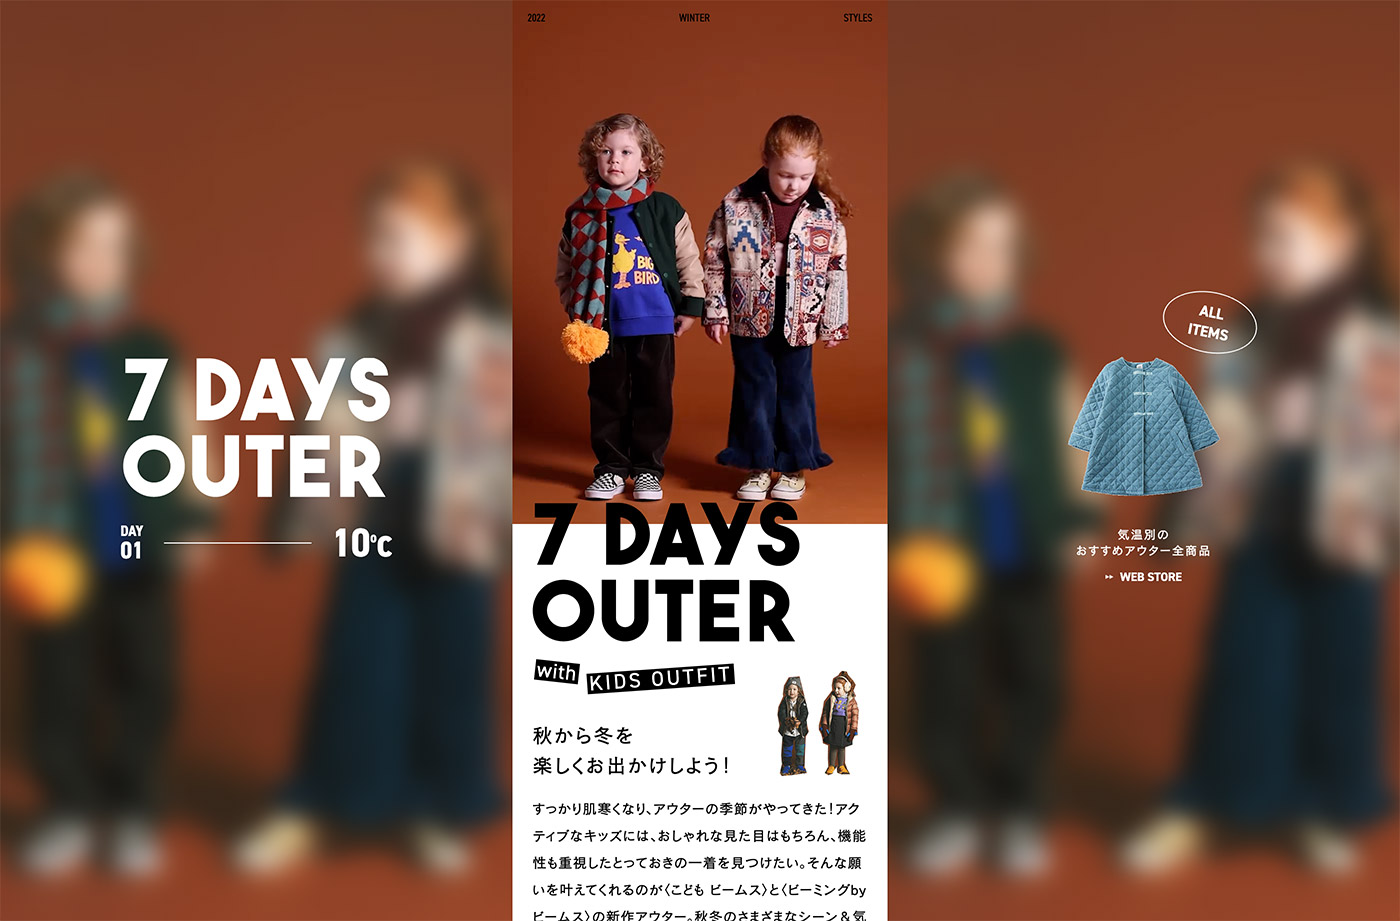 7DAYS OUTER with KIDS OUTFIT｜BEAMSウェブサイトの画面キャプチャ画像